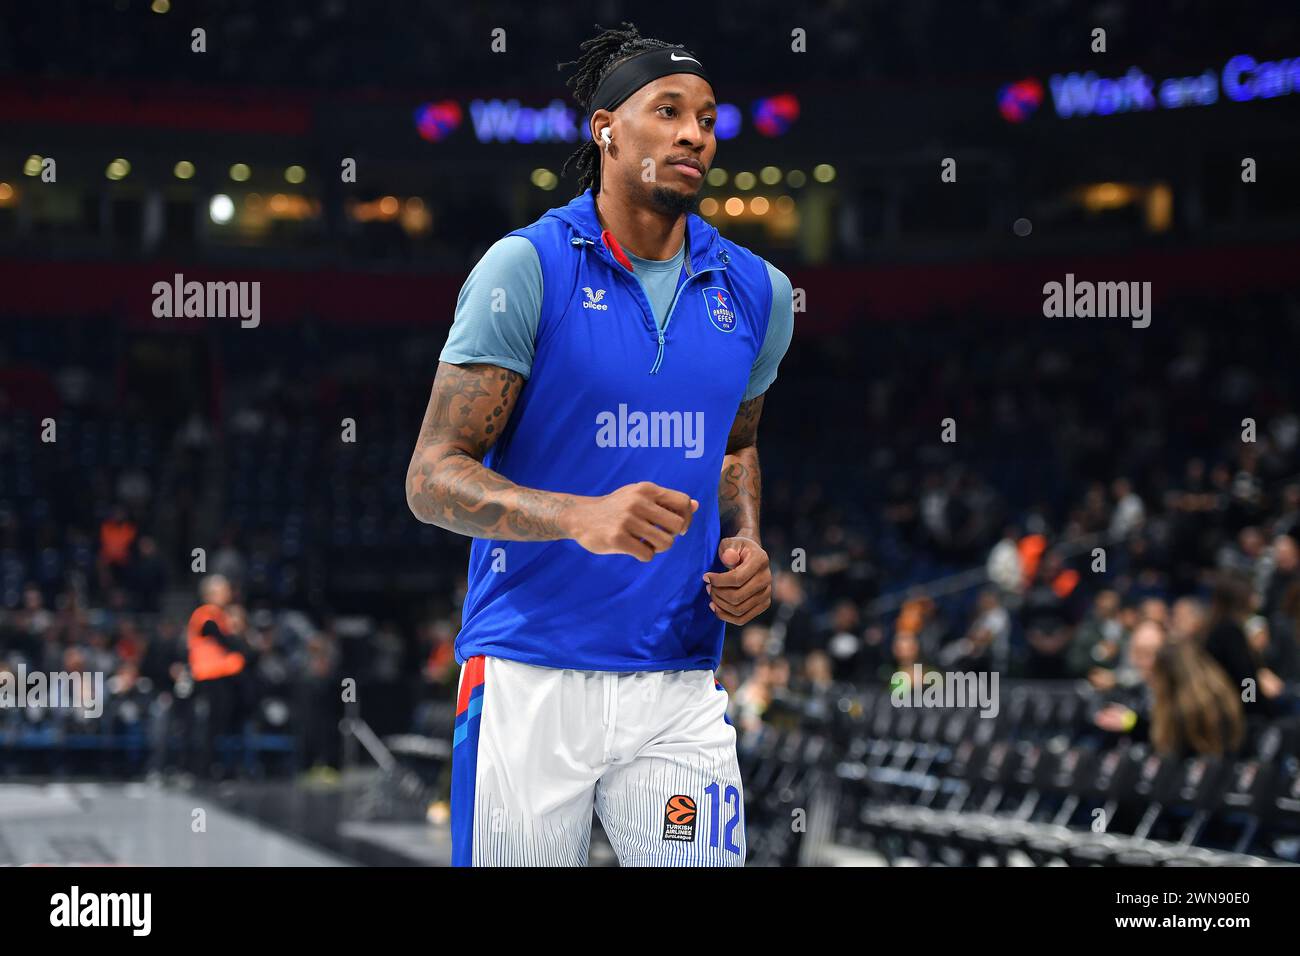 Belgrade, Serbia, 29 February, 2023. Will Clyburn of Anadolu Efes Istanbul warms up during the 2023/2024 Turkish Airlines EuroLeague, Round 27 match between Partizan Mozzart Bet Belgrade and Anadolu Efes Istanbul at Stark Arena in Belgrade, Serbia. February 29, 2023. Credit: Nikola Krstic/Alamy Stock Photo